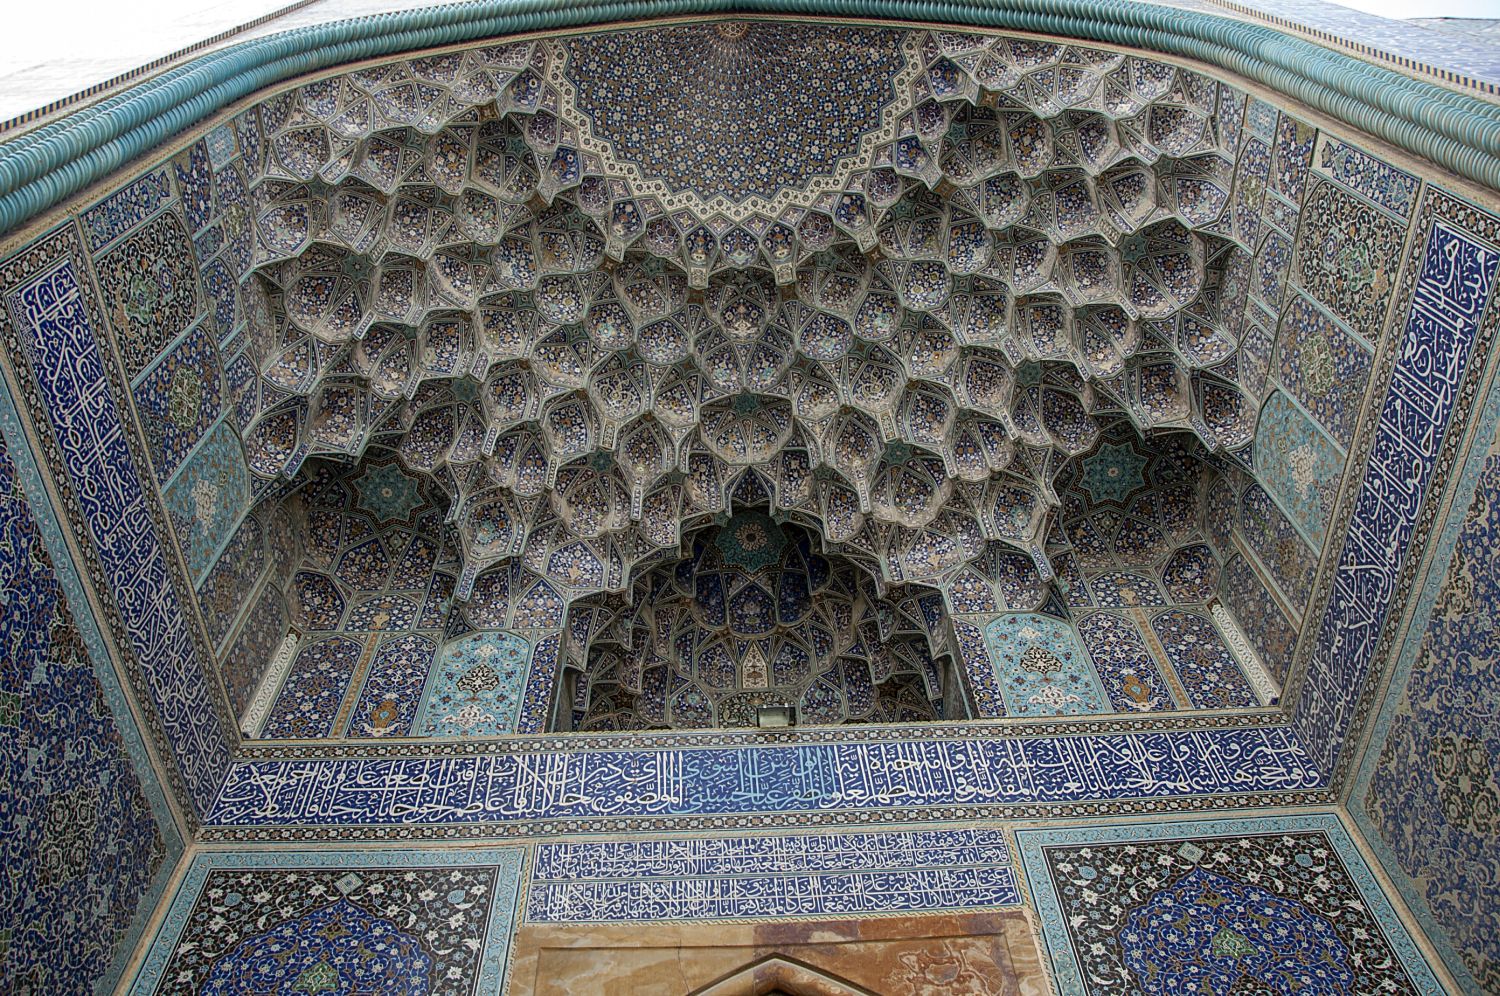 View of muqarnas vault in entrance portal from below.